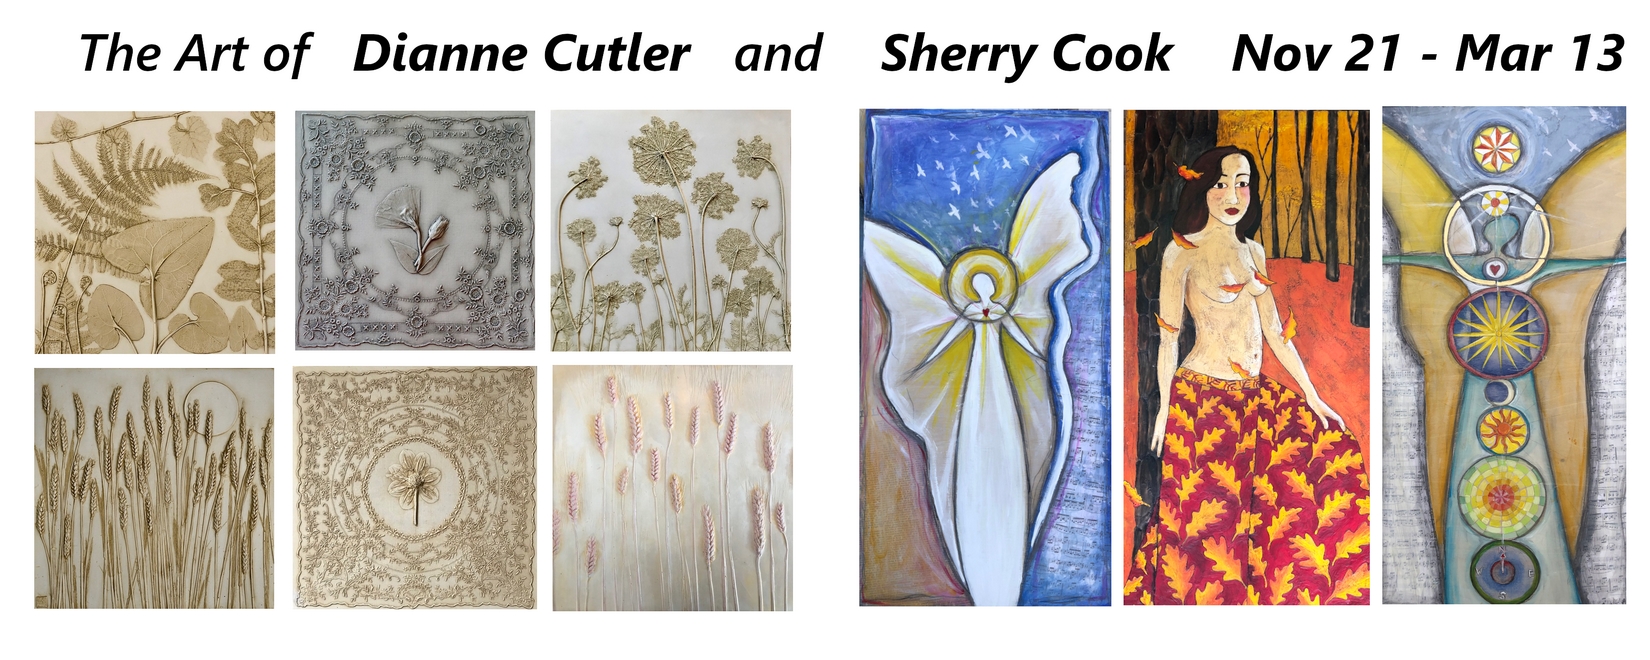 The Art of Dianne Cutler & Sherry Cook 2020